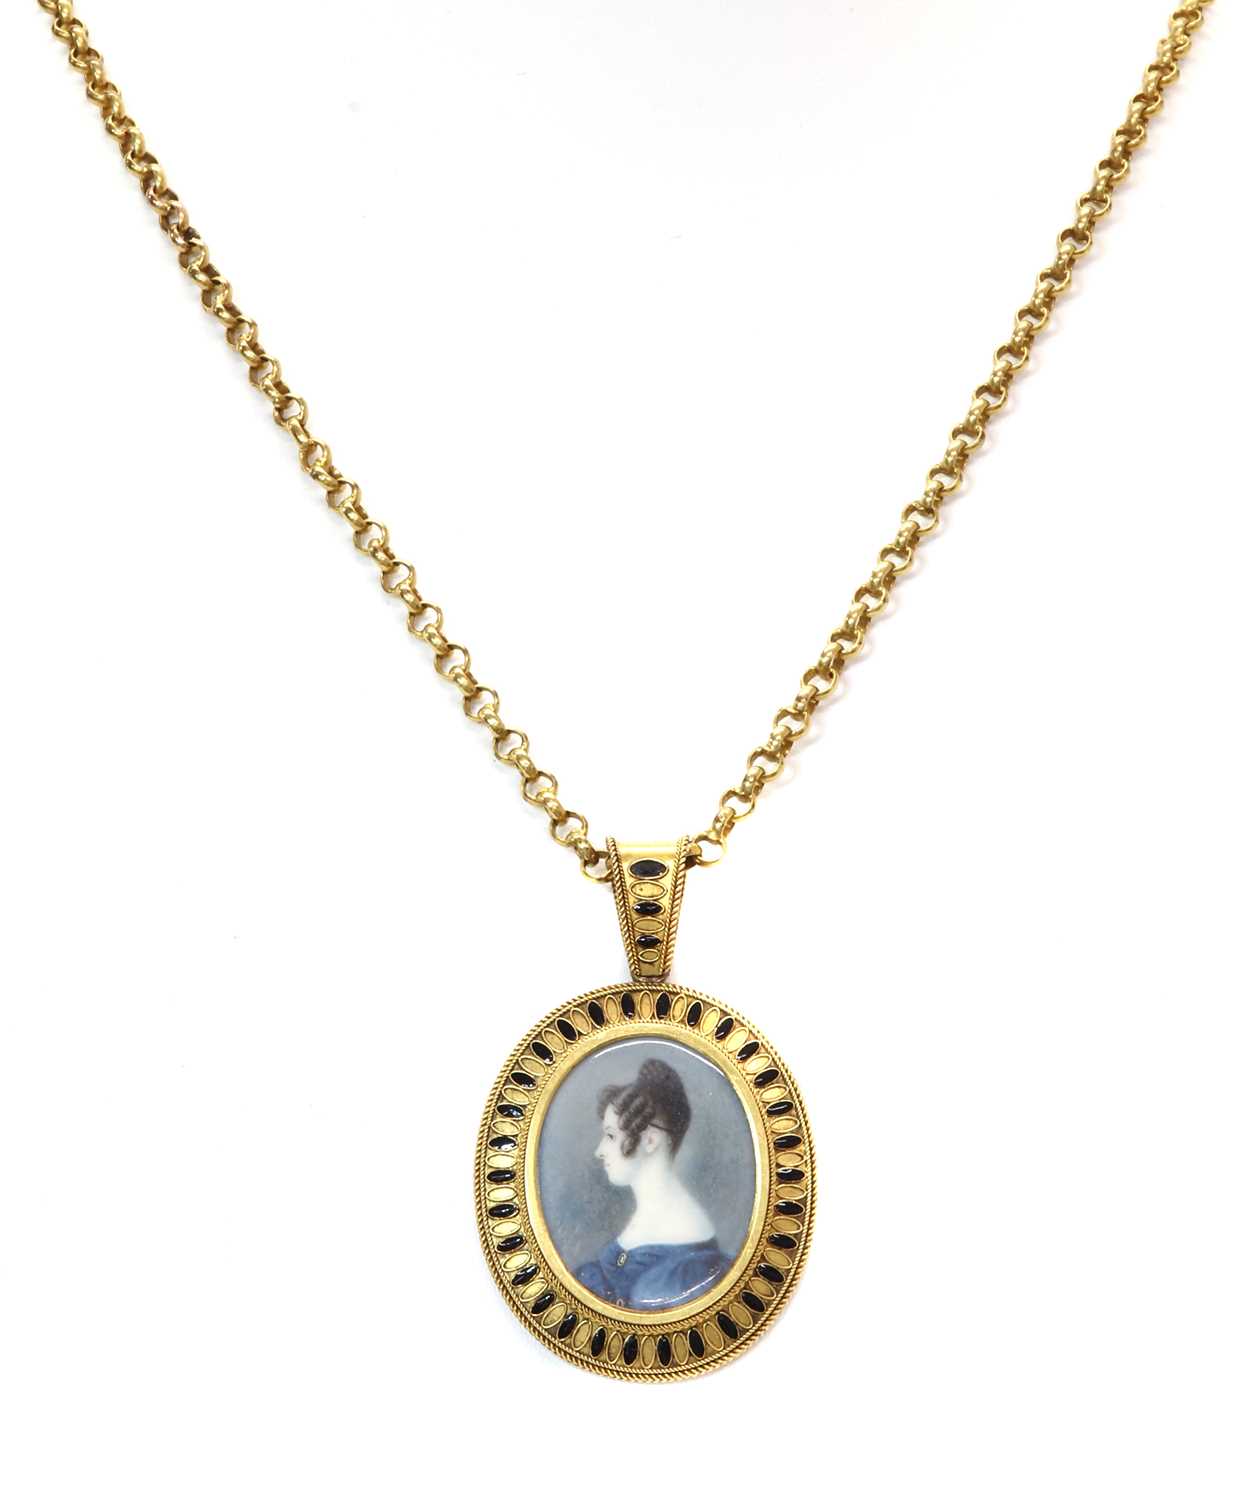 Lot 58 - An Etruscan style gold and enamel glazed picture locket, c.1860